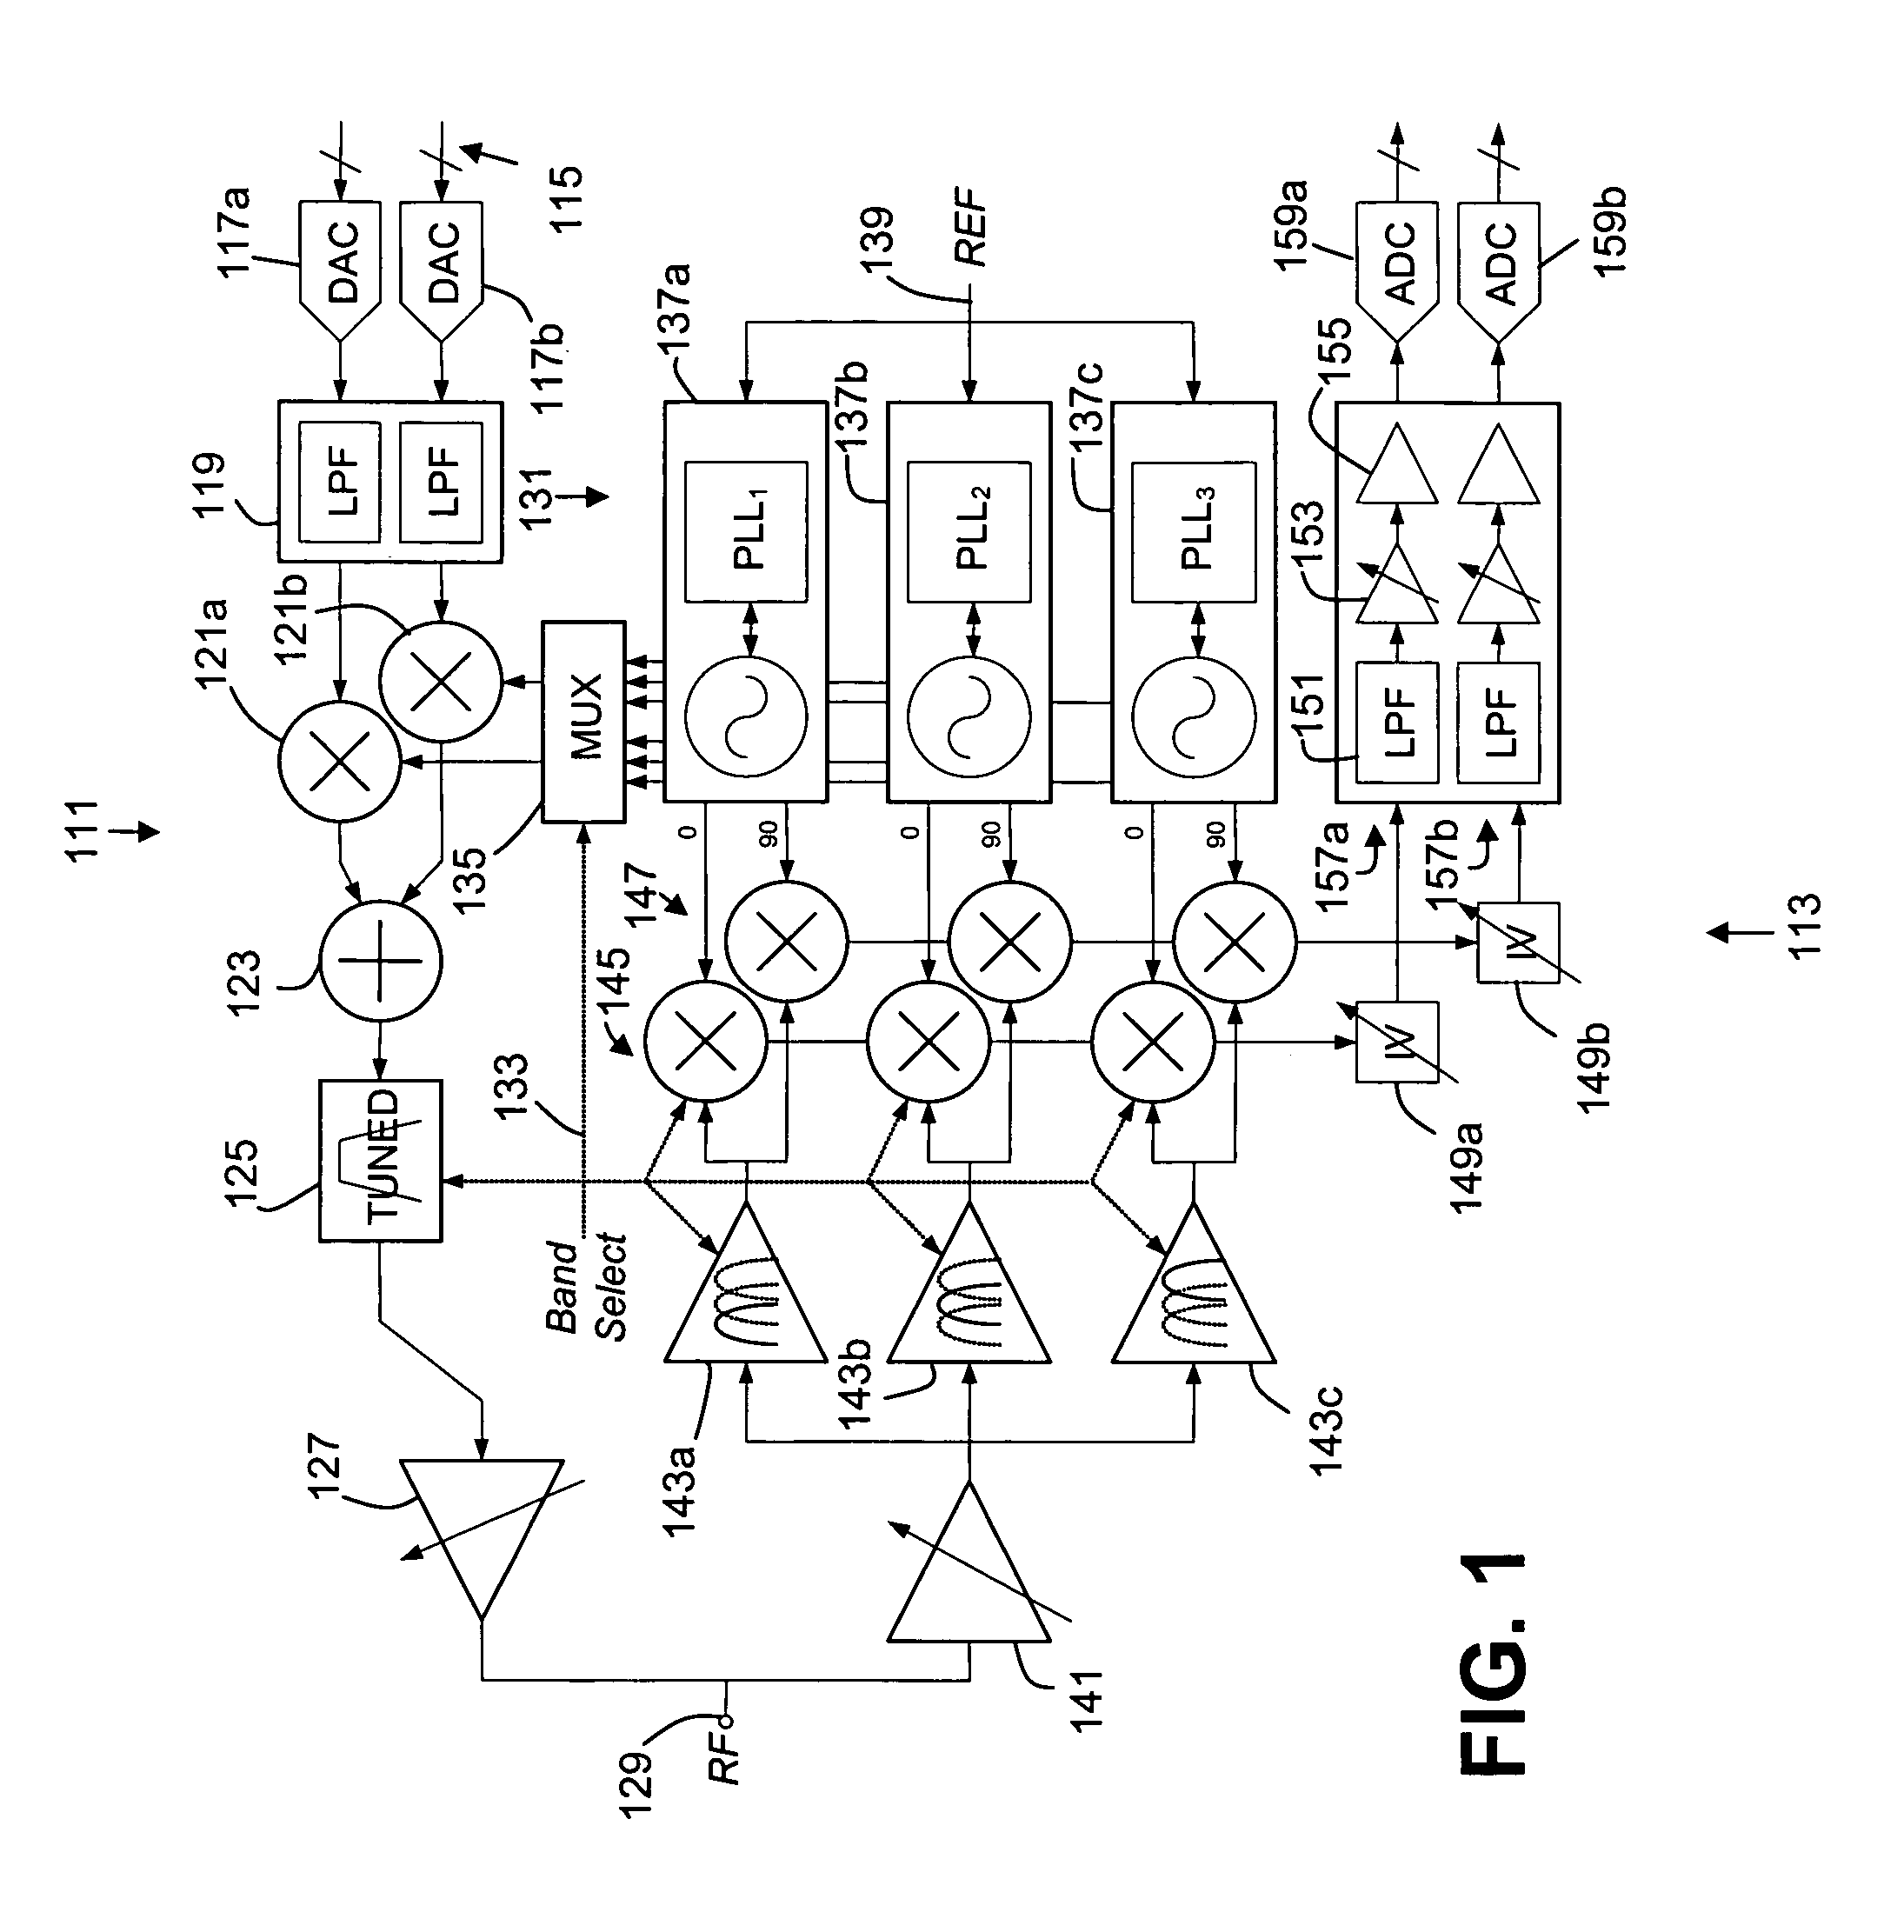 Method and apparatus for DC offset calibration